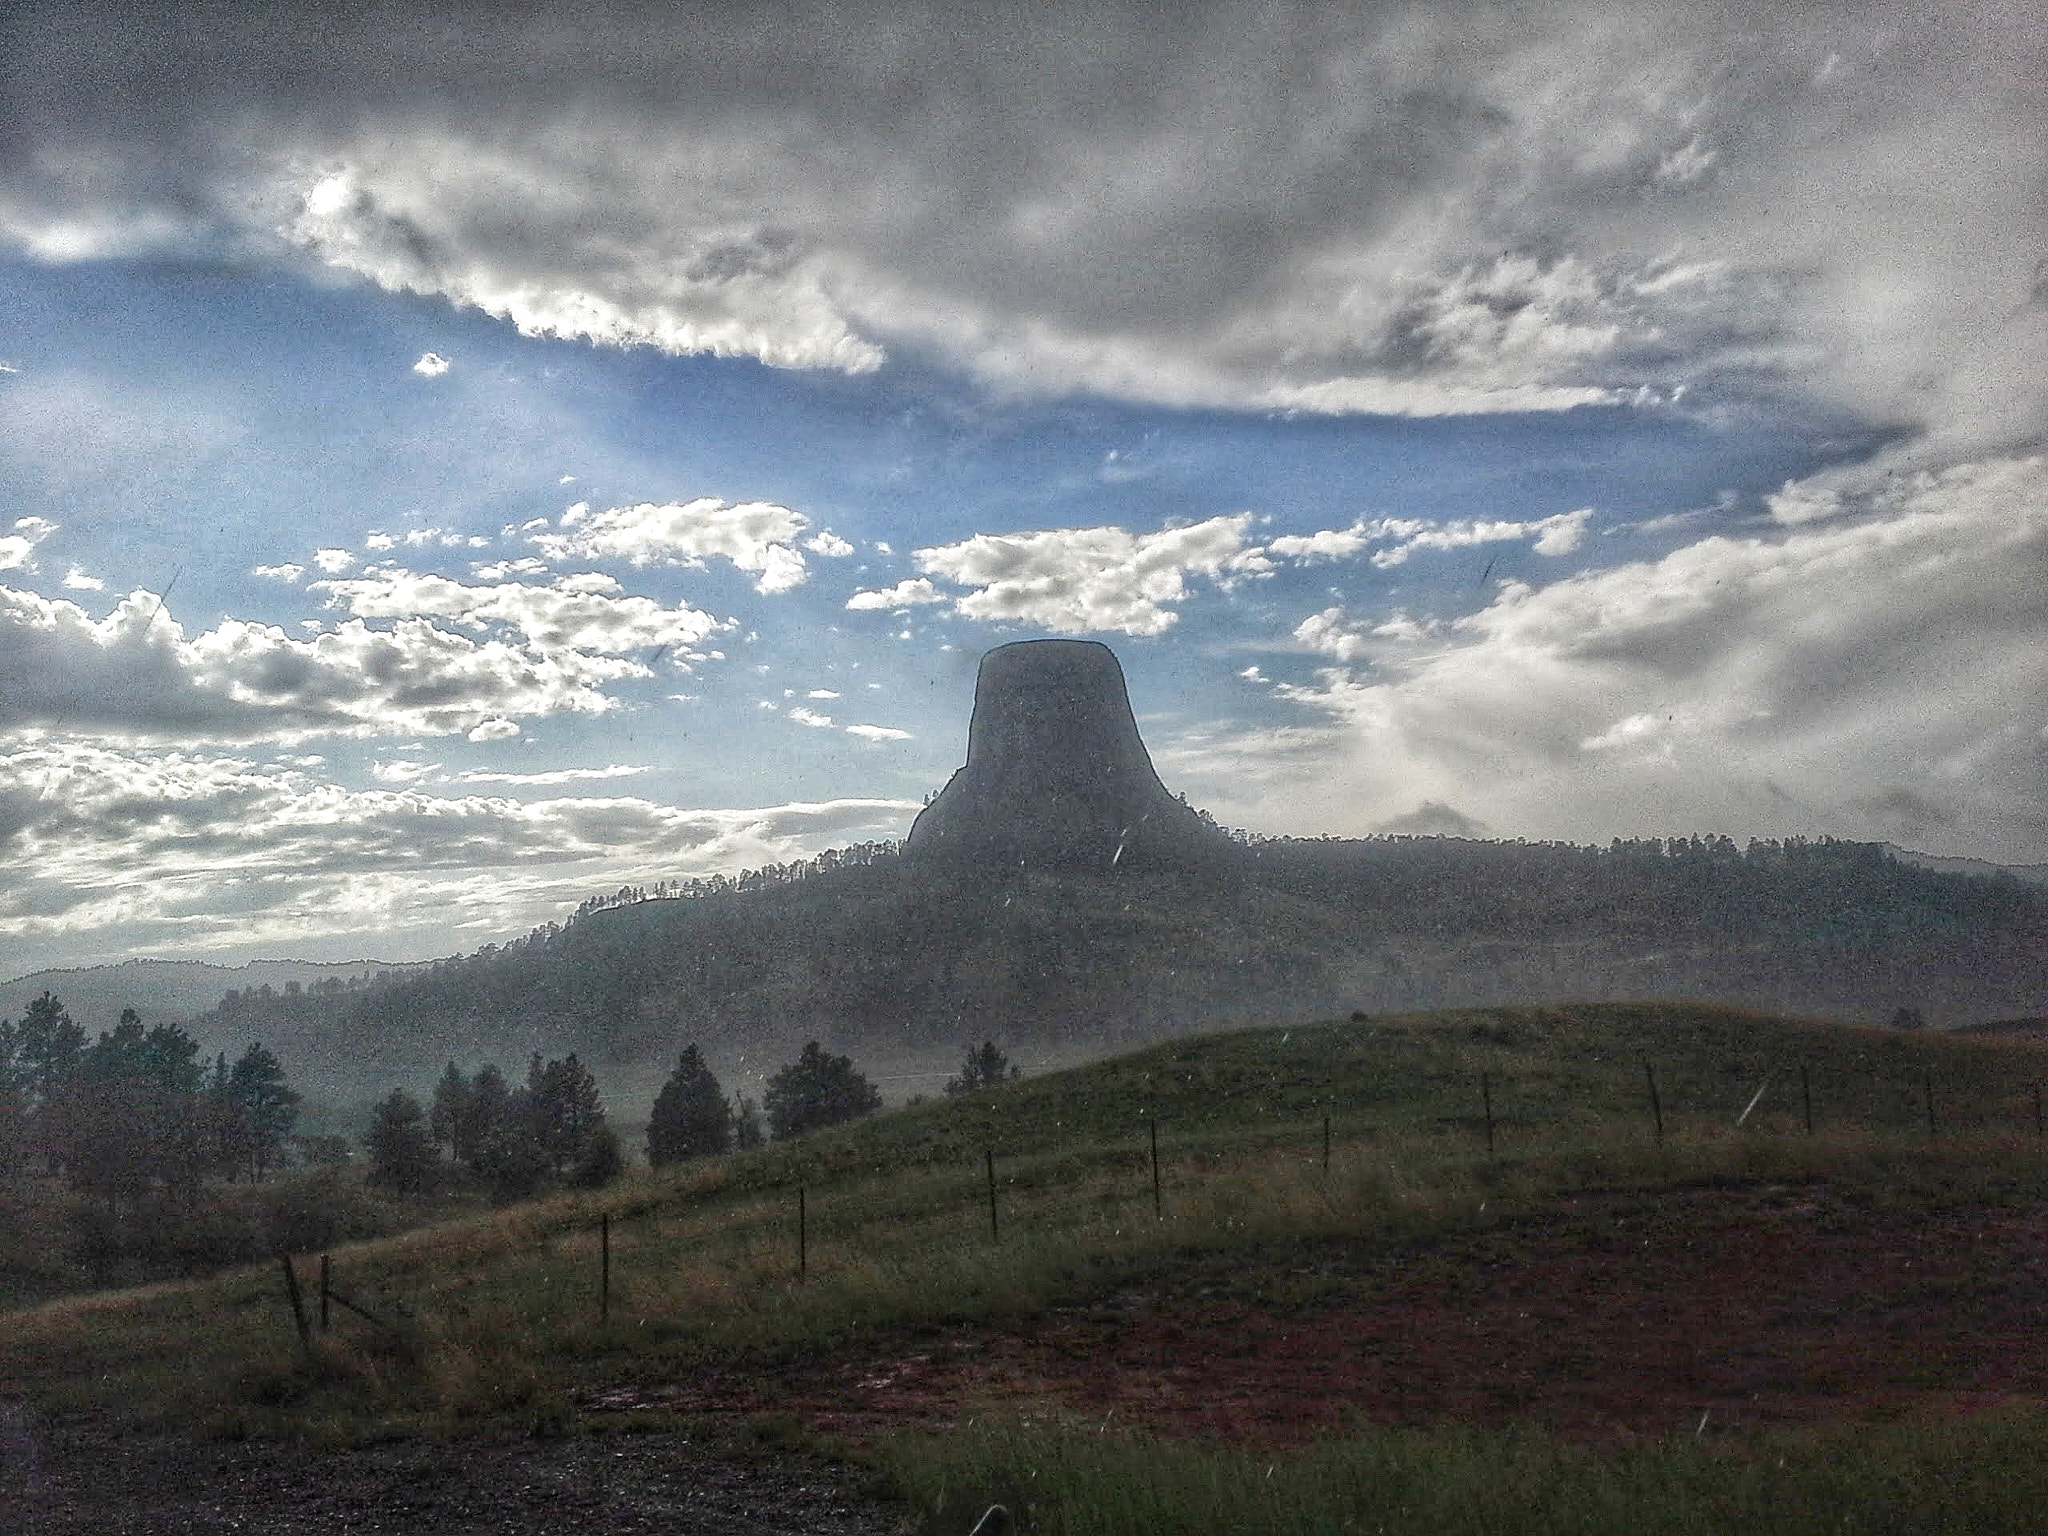 Samsung Galaxy Victory sample photo. Storm approaches the devil's tower photography